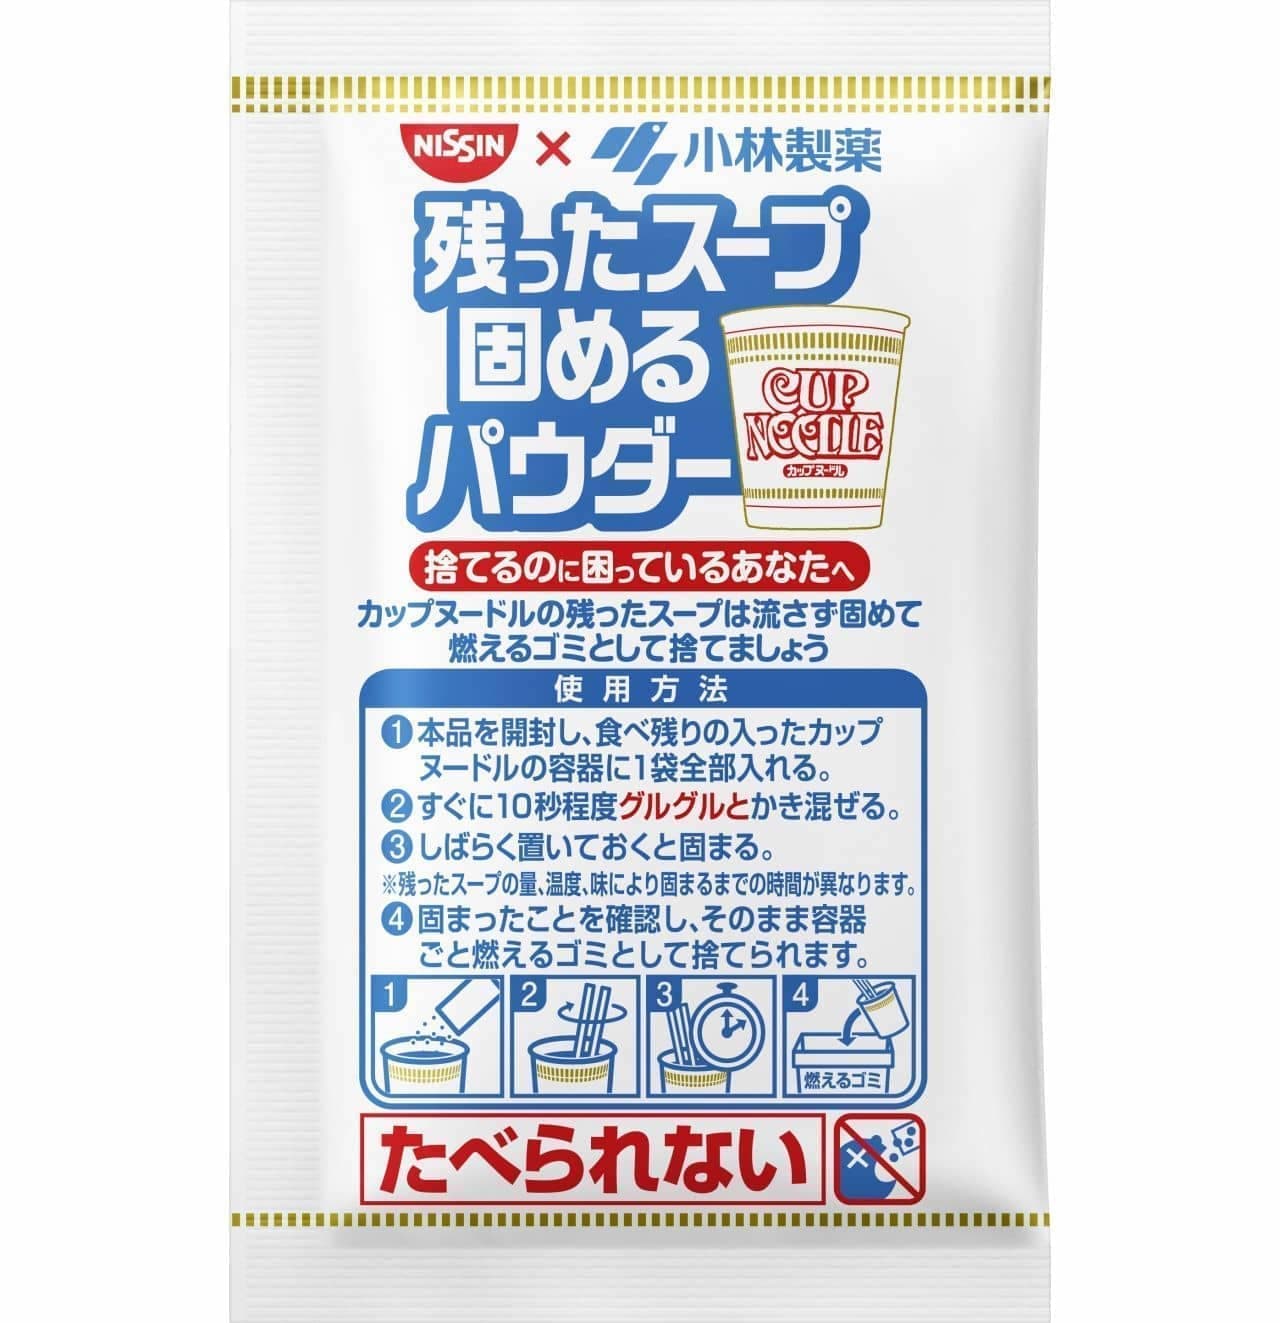 Jointly developed "Cup Noodle Remaining Soup Hardening Powder"